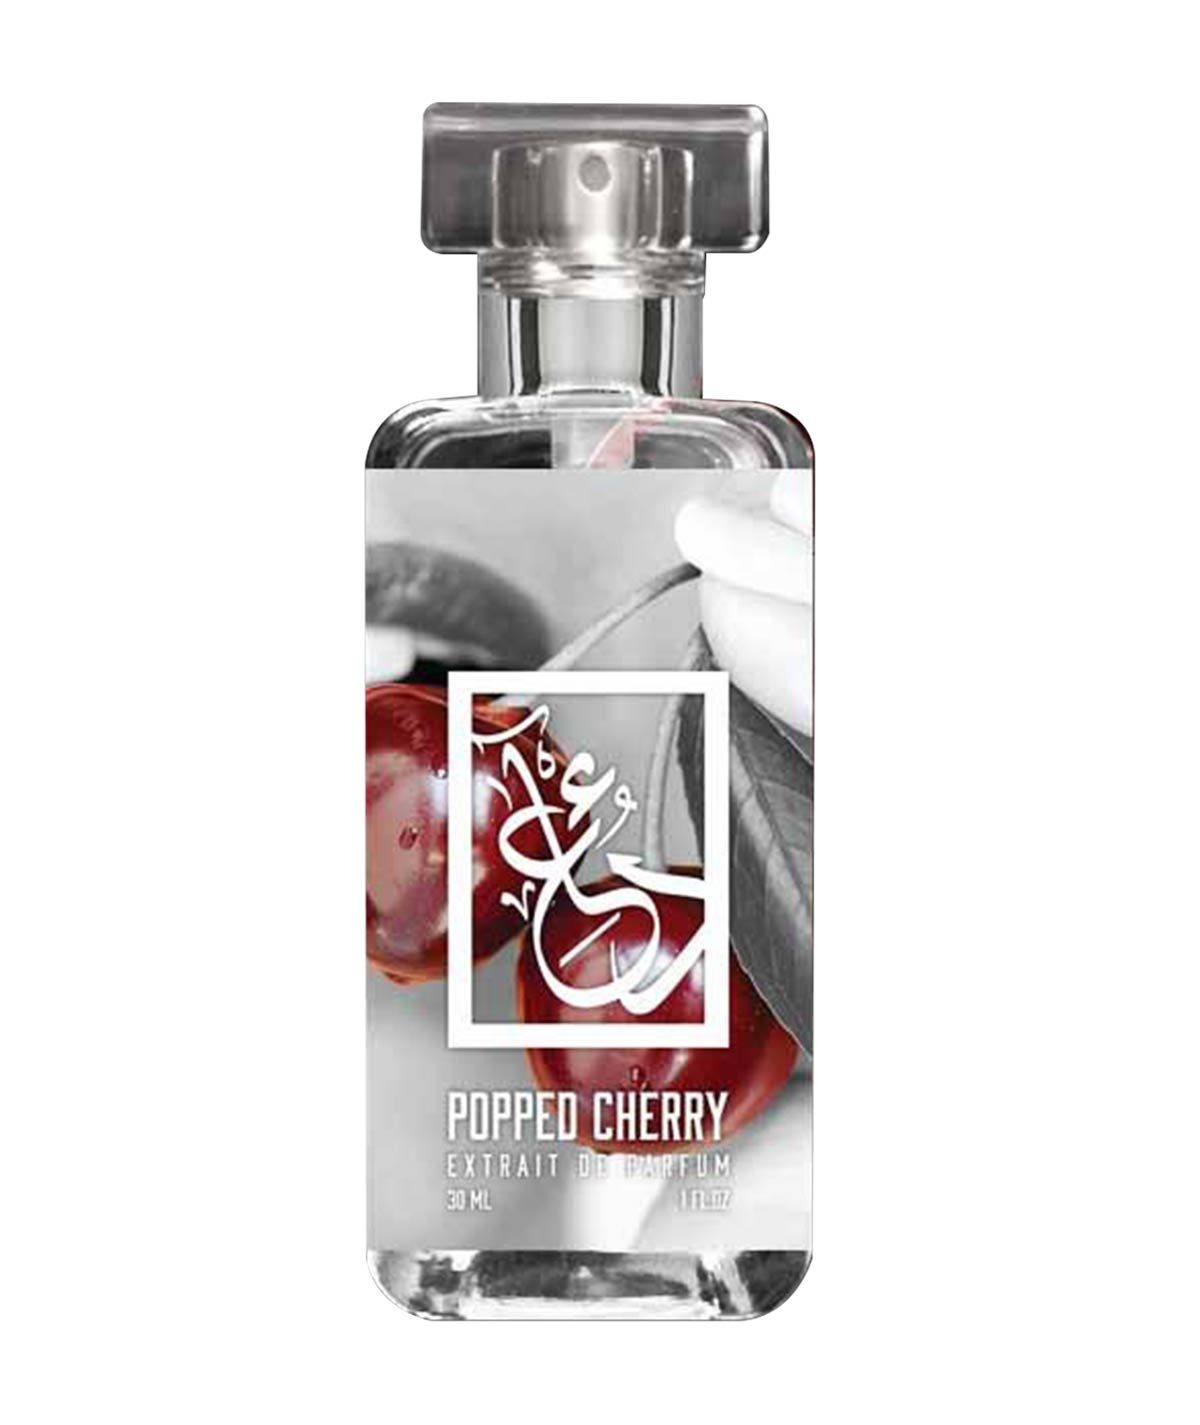 Perfume Dupes Similar To Tom Ford Lost Cherry - FragranceReview.com